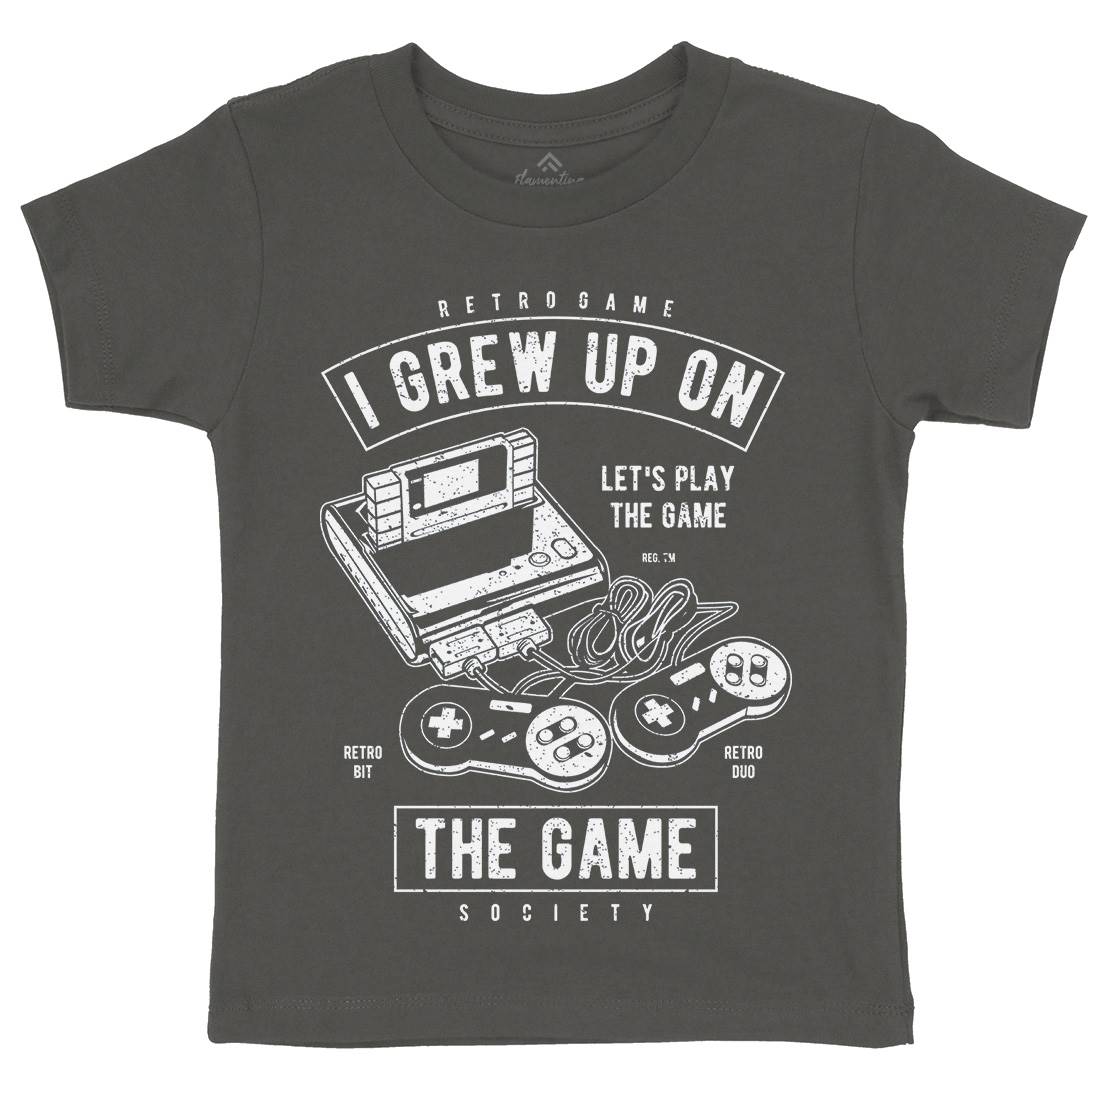 Grew Up On The Game Kids Organic Crew Neck T-Shirt Geek A679